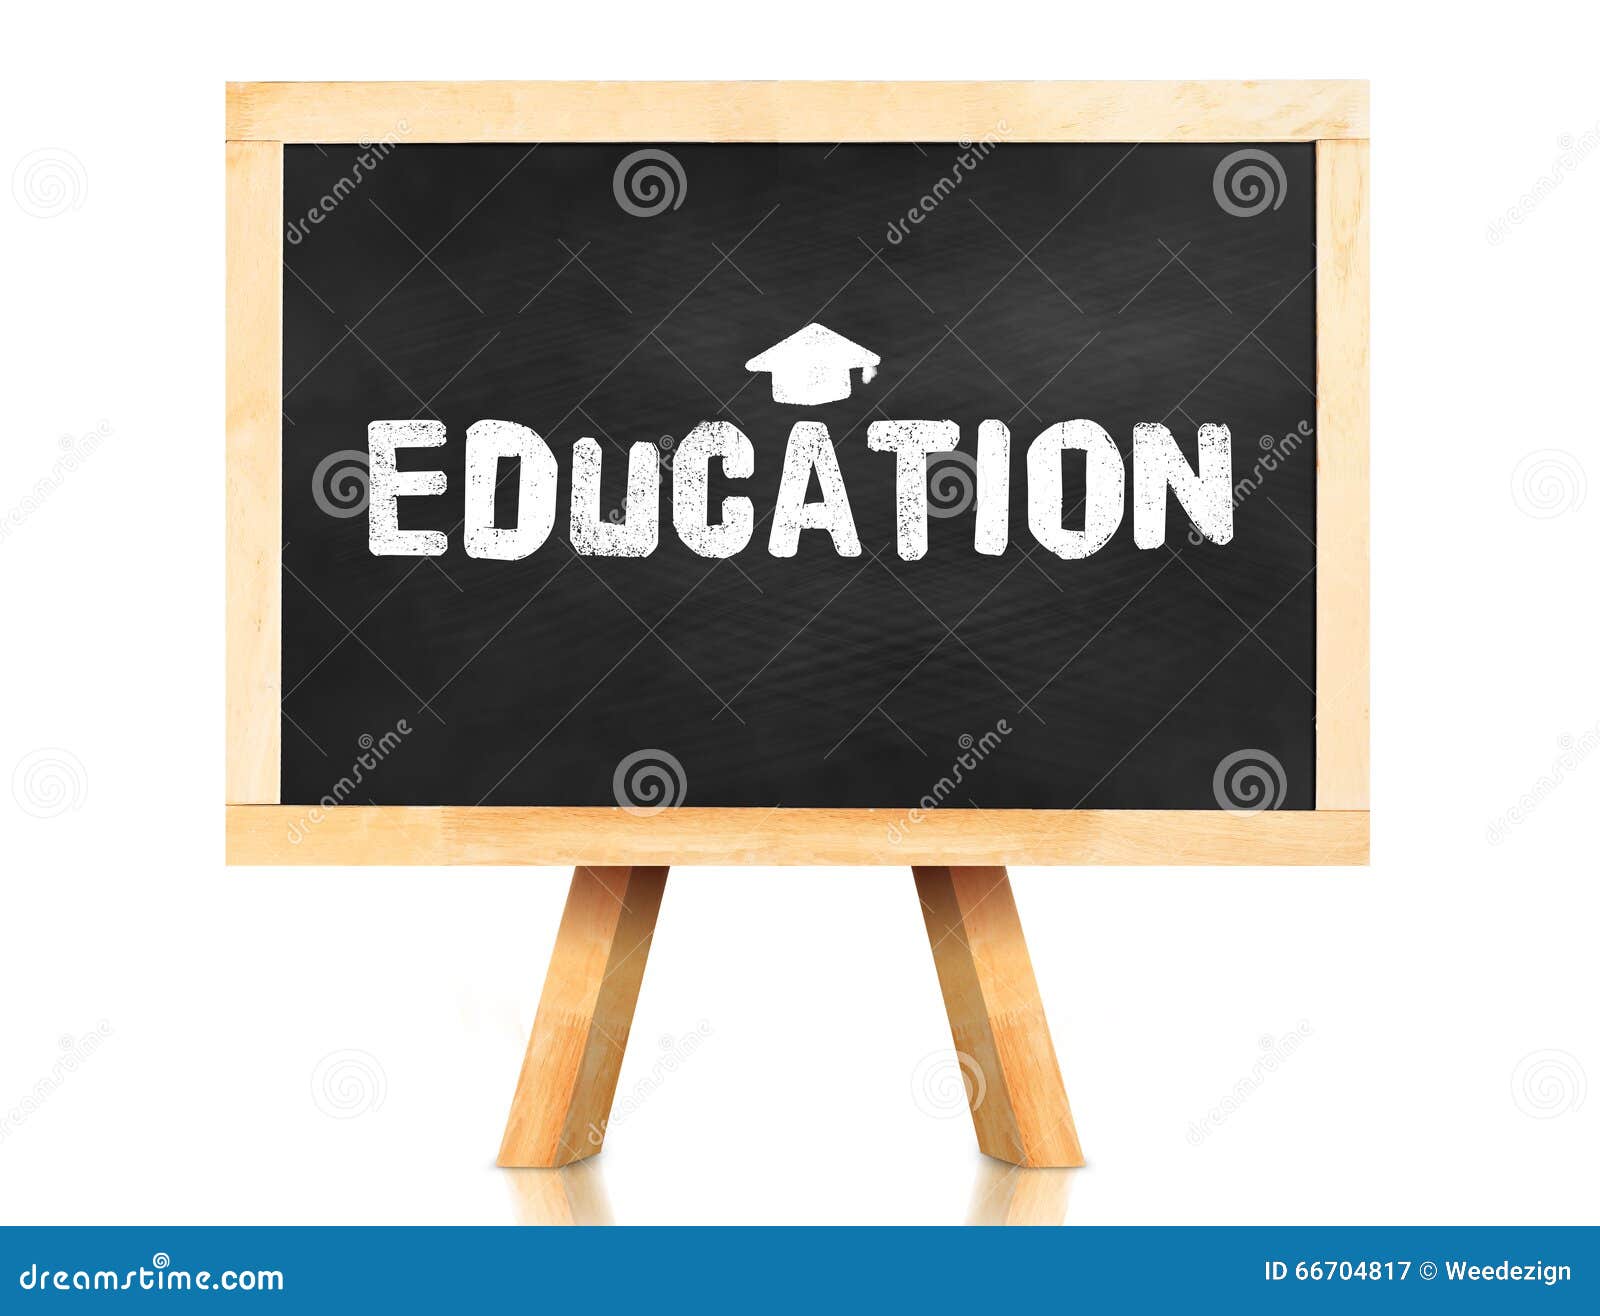 education word graduation cap icon blackboard easel reflection white background business concept 66704817